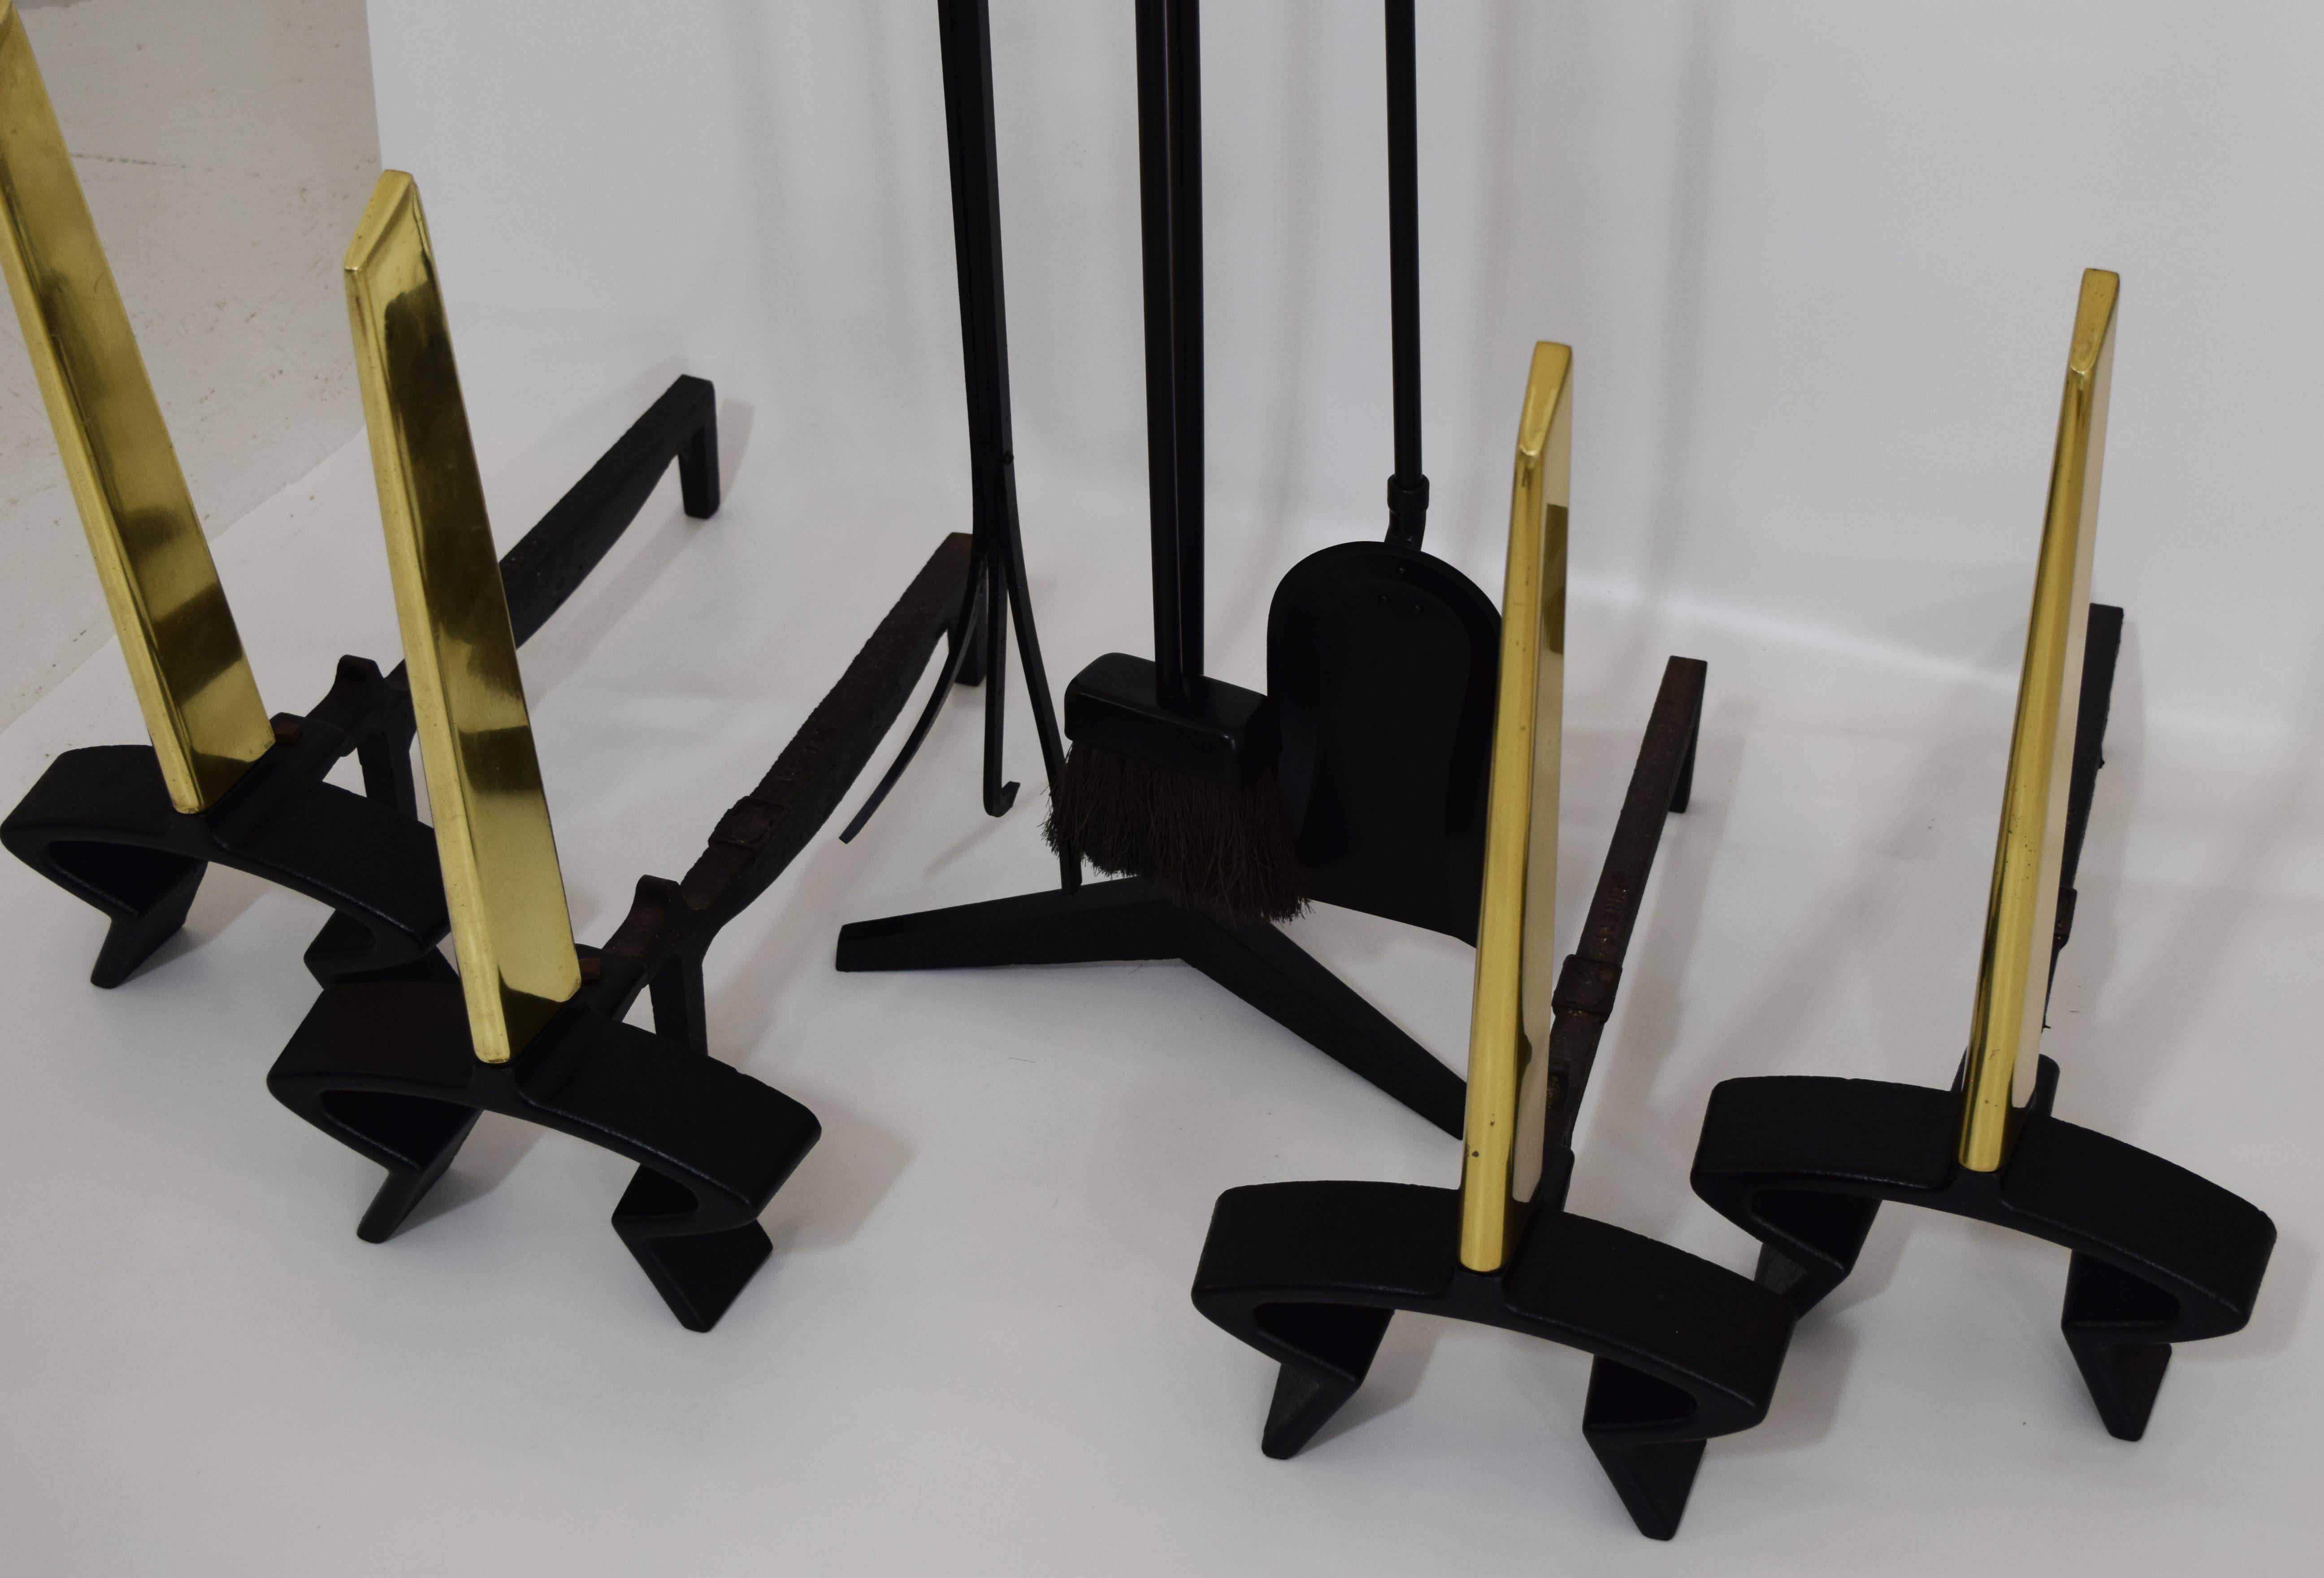 Circa 1950, 8 Piece Mid-Century Modern fireplace tool set and Andirons (4) by Donald Deskey for Bennett, all Andirons are signed. Tool set comes with log grabber with ring, and is also a poker, shovel and brush. The owner had 2 fireplaces and one